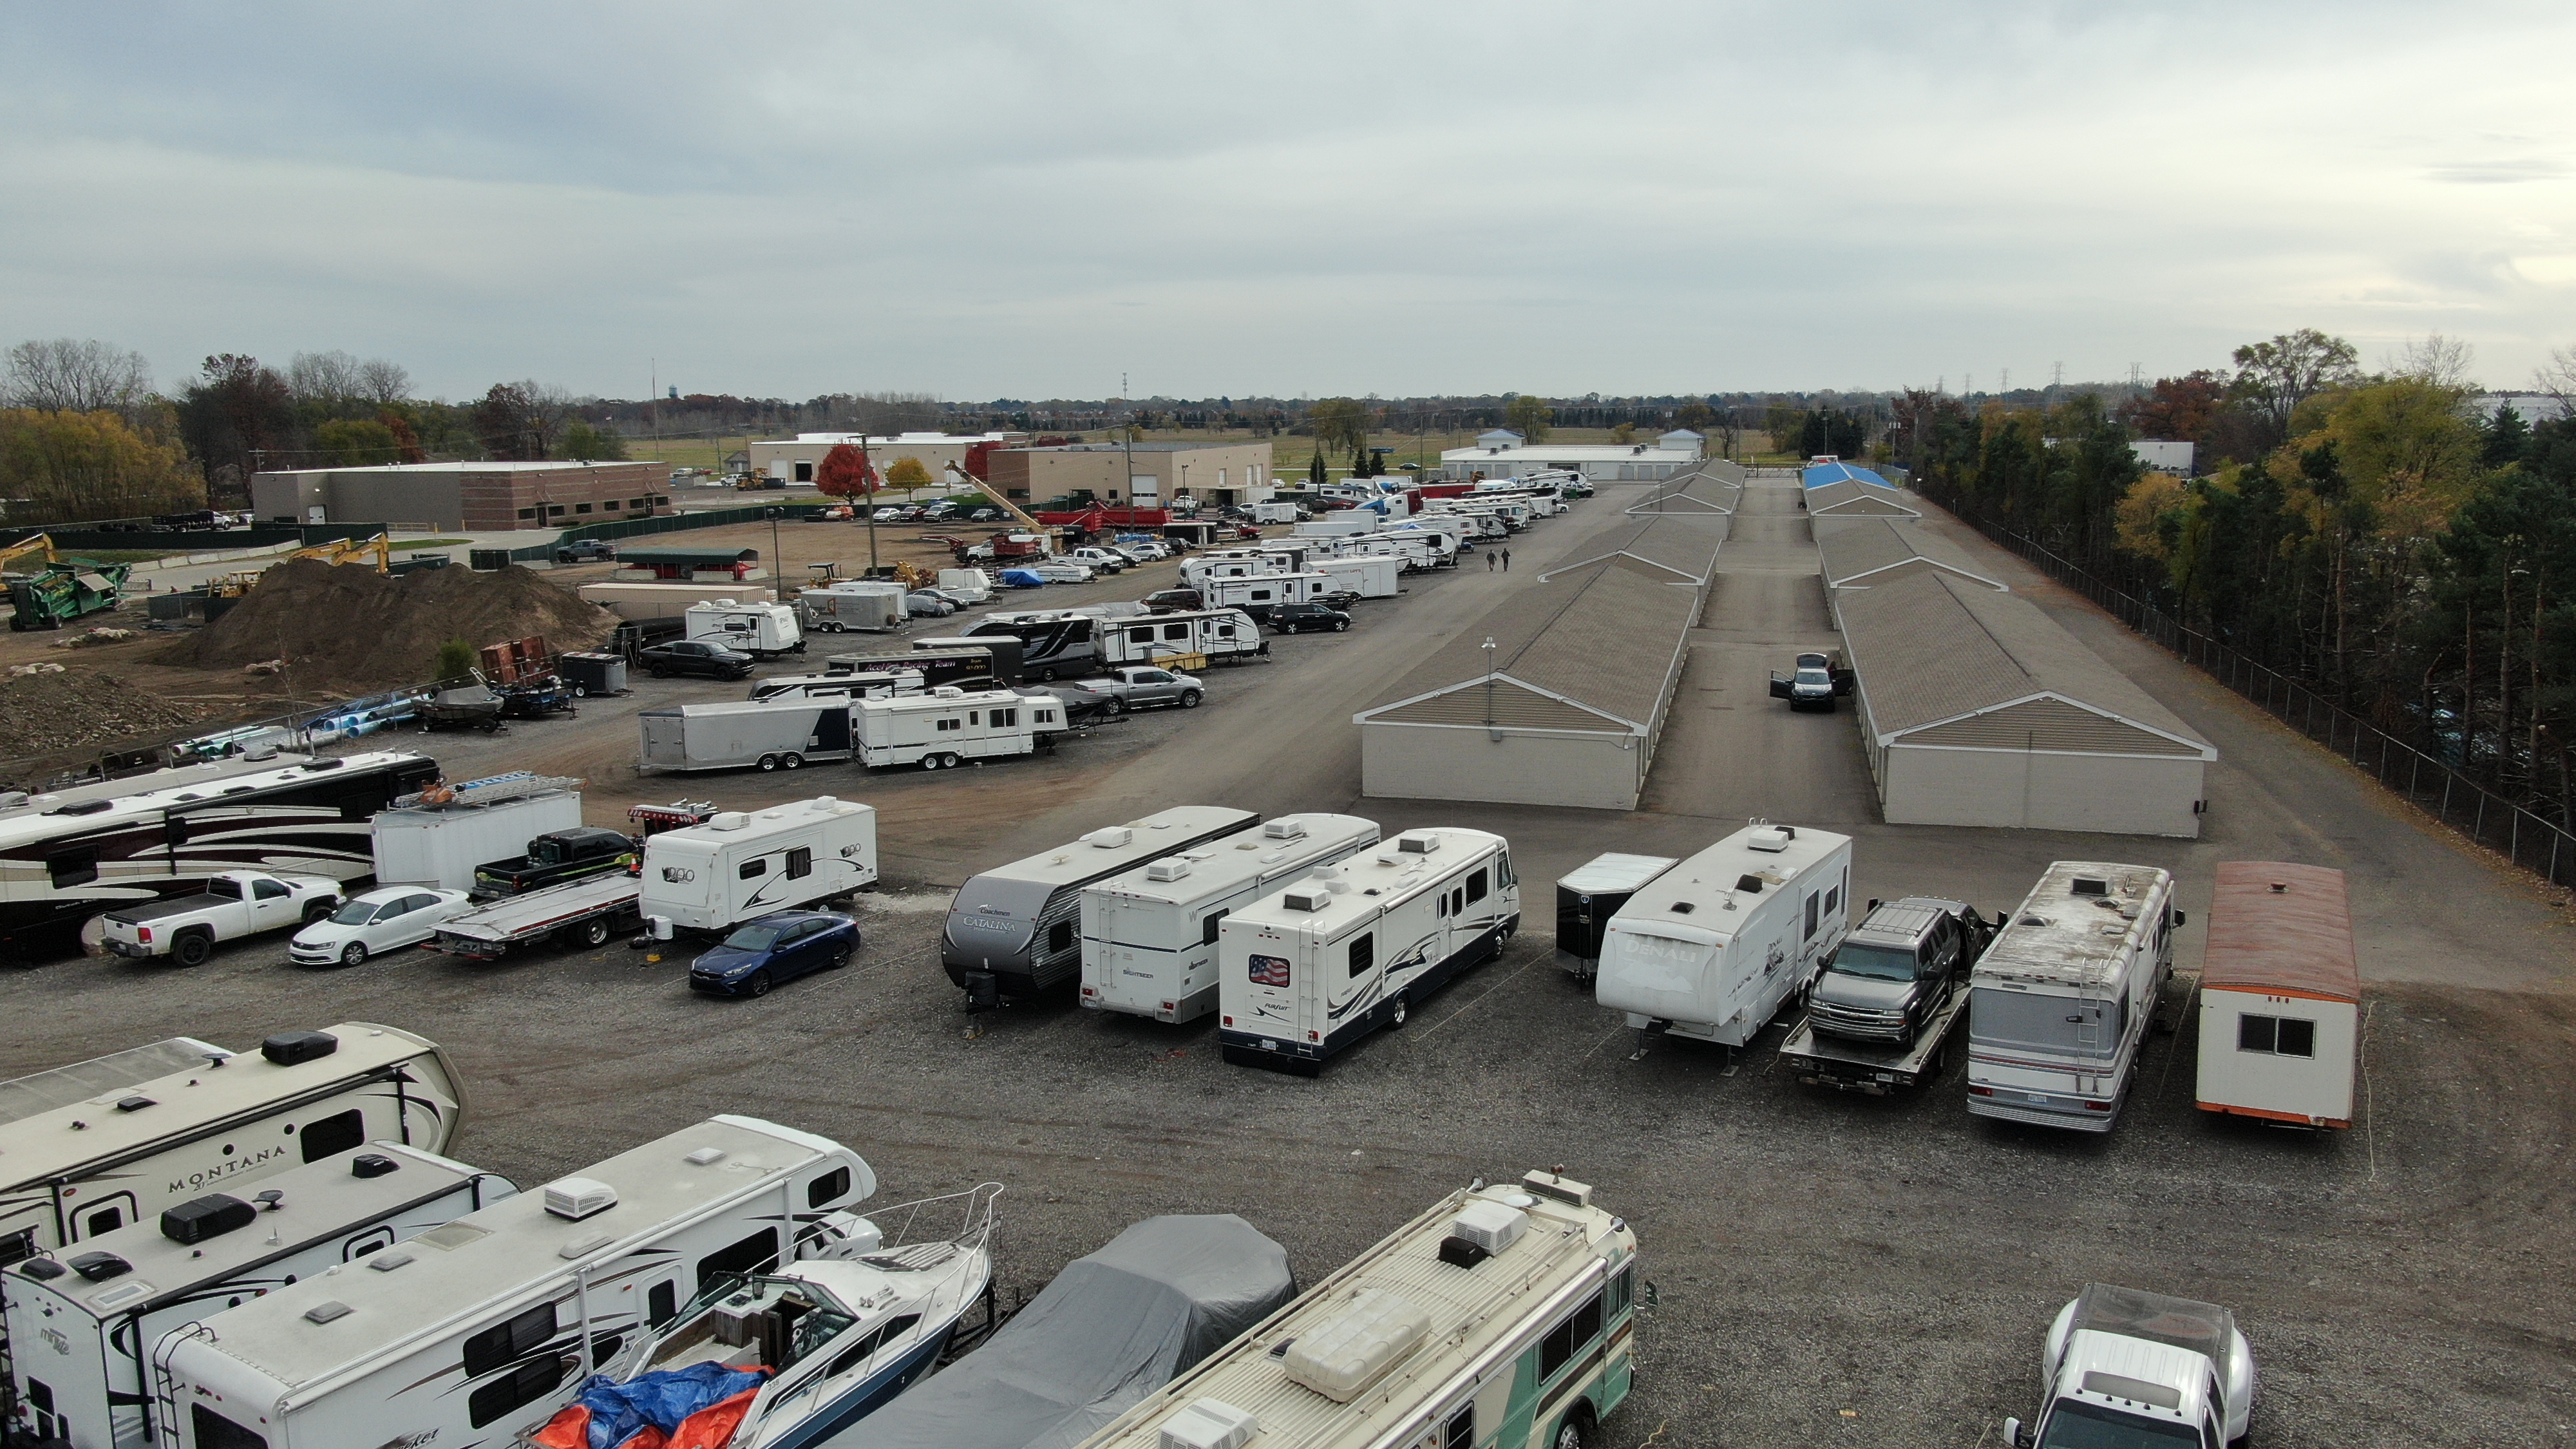 RV, trailer, boat, and car parking in Shelby Charter Twp, MI